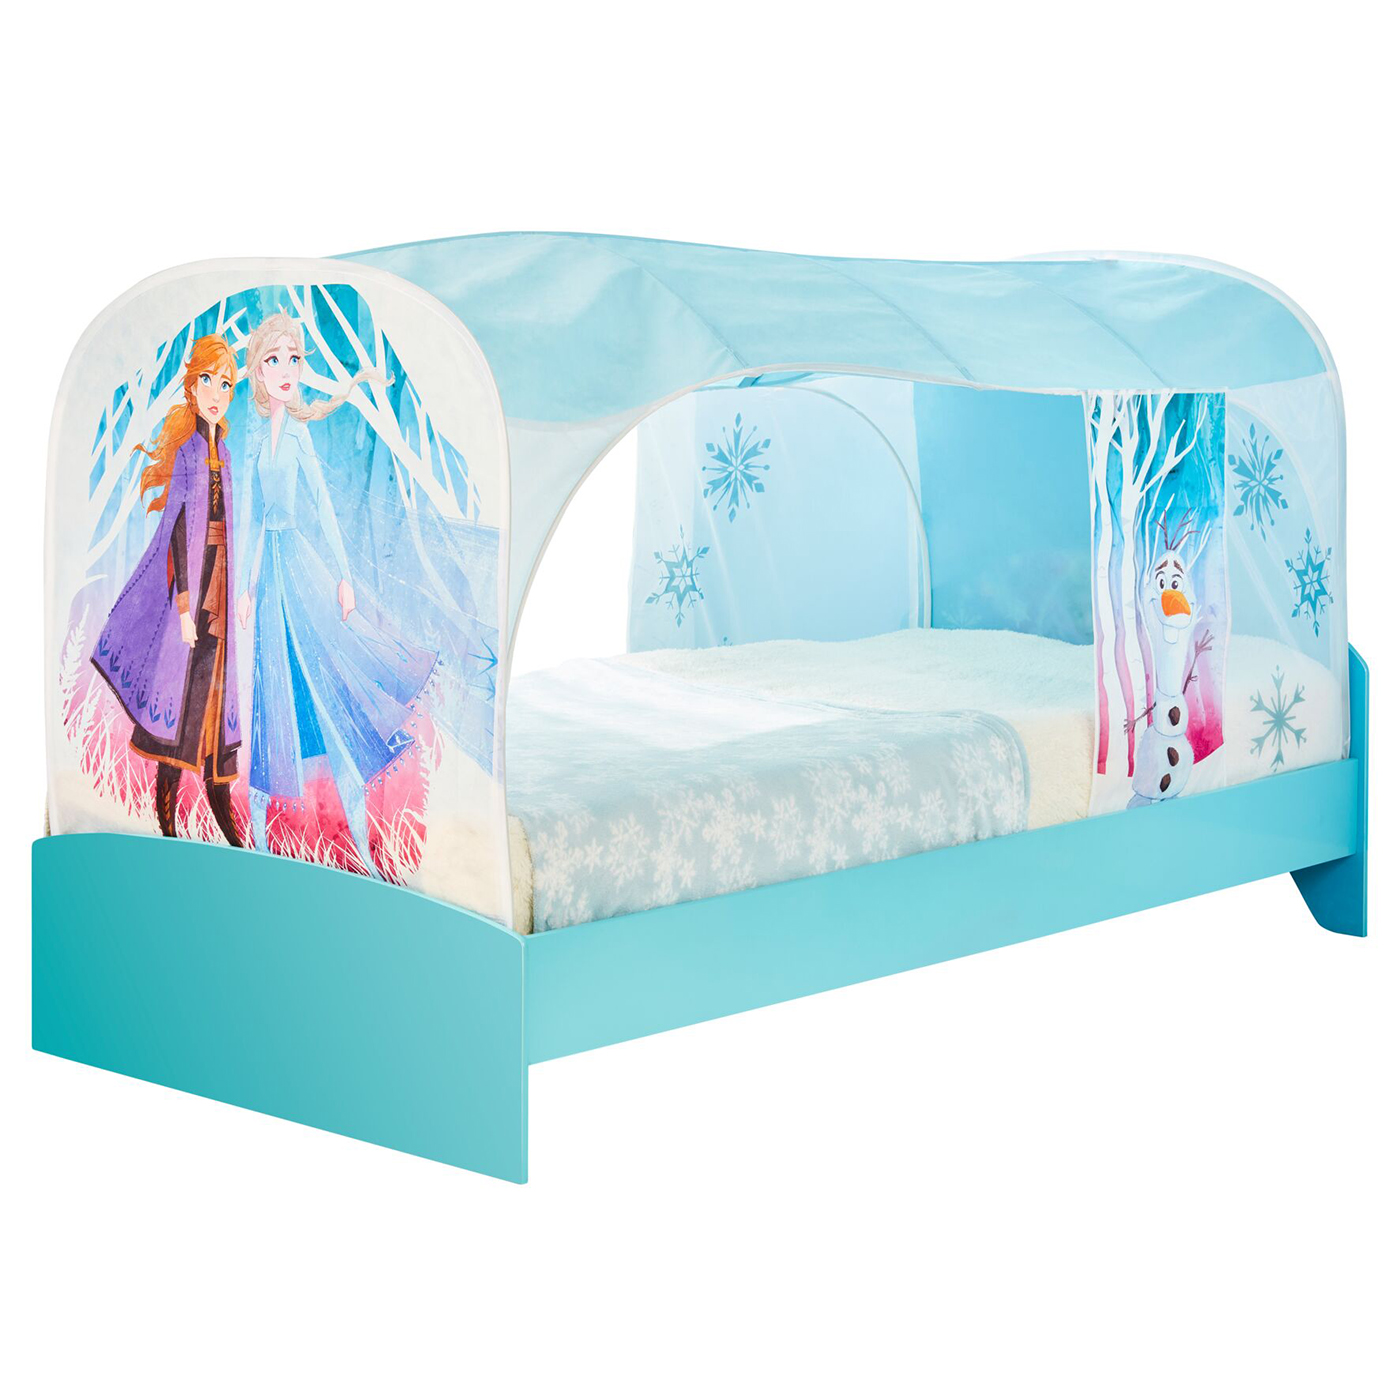 Disney Frozen Kids Bed Canopy For Single Bed and Toddler Bed 